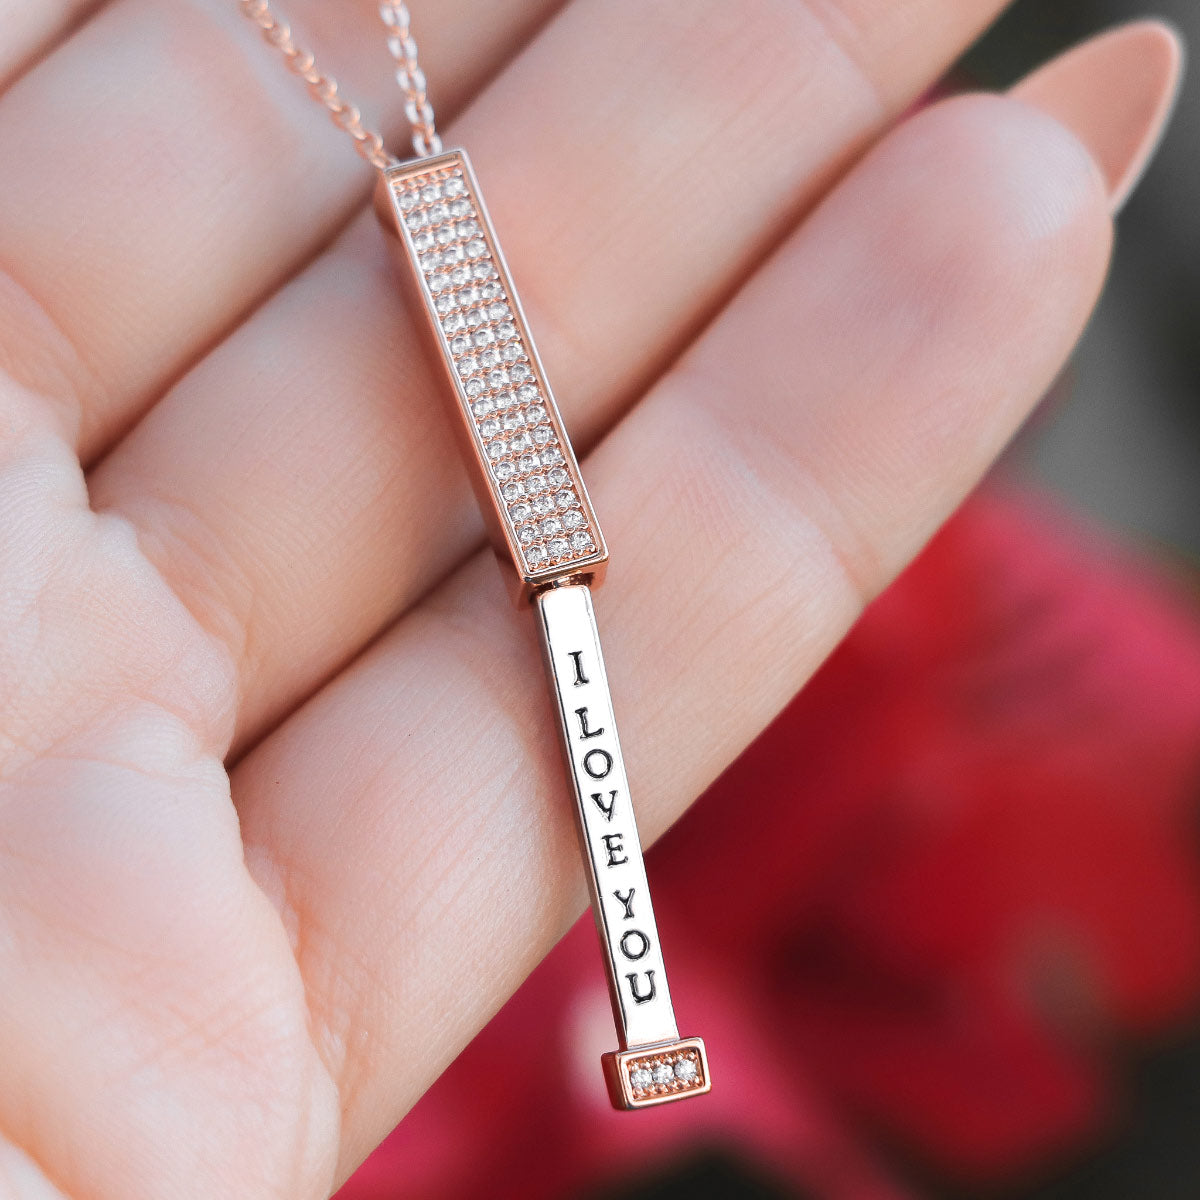 BUY 1 GET 1 FREE Secret Sentiments - I Love You - Pendant Necklace with Gift Pouch